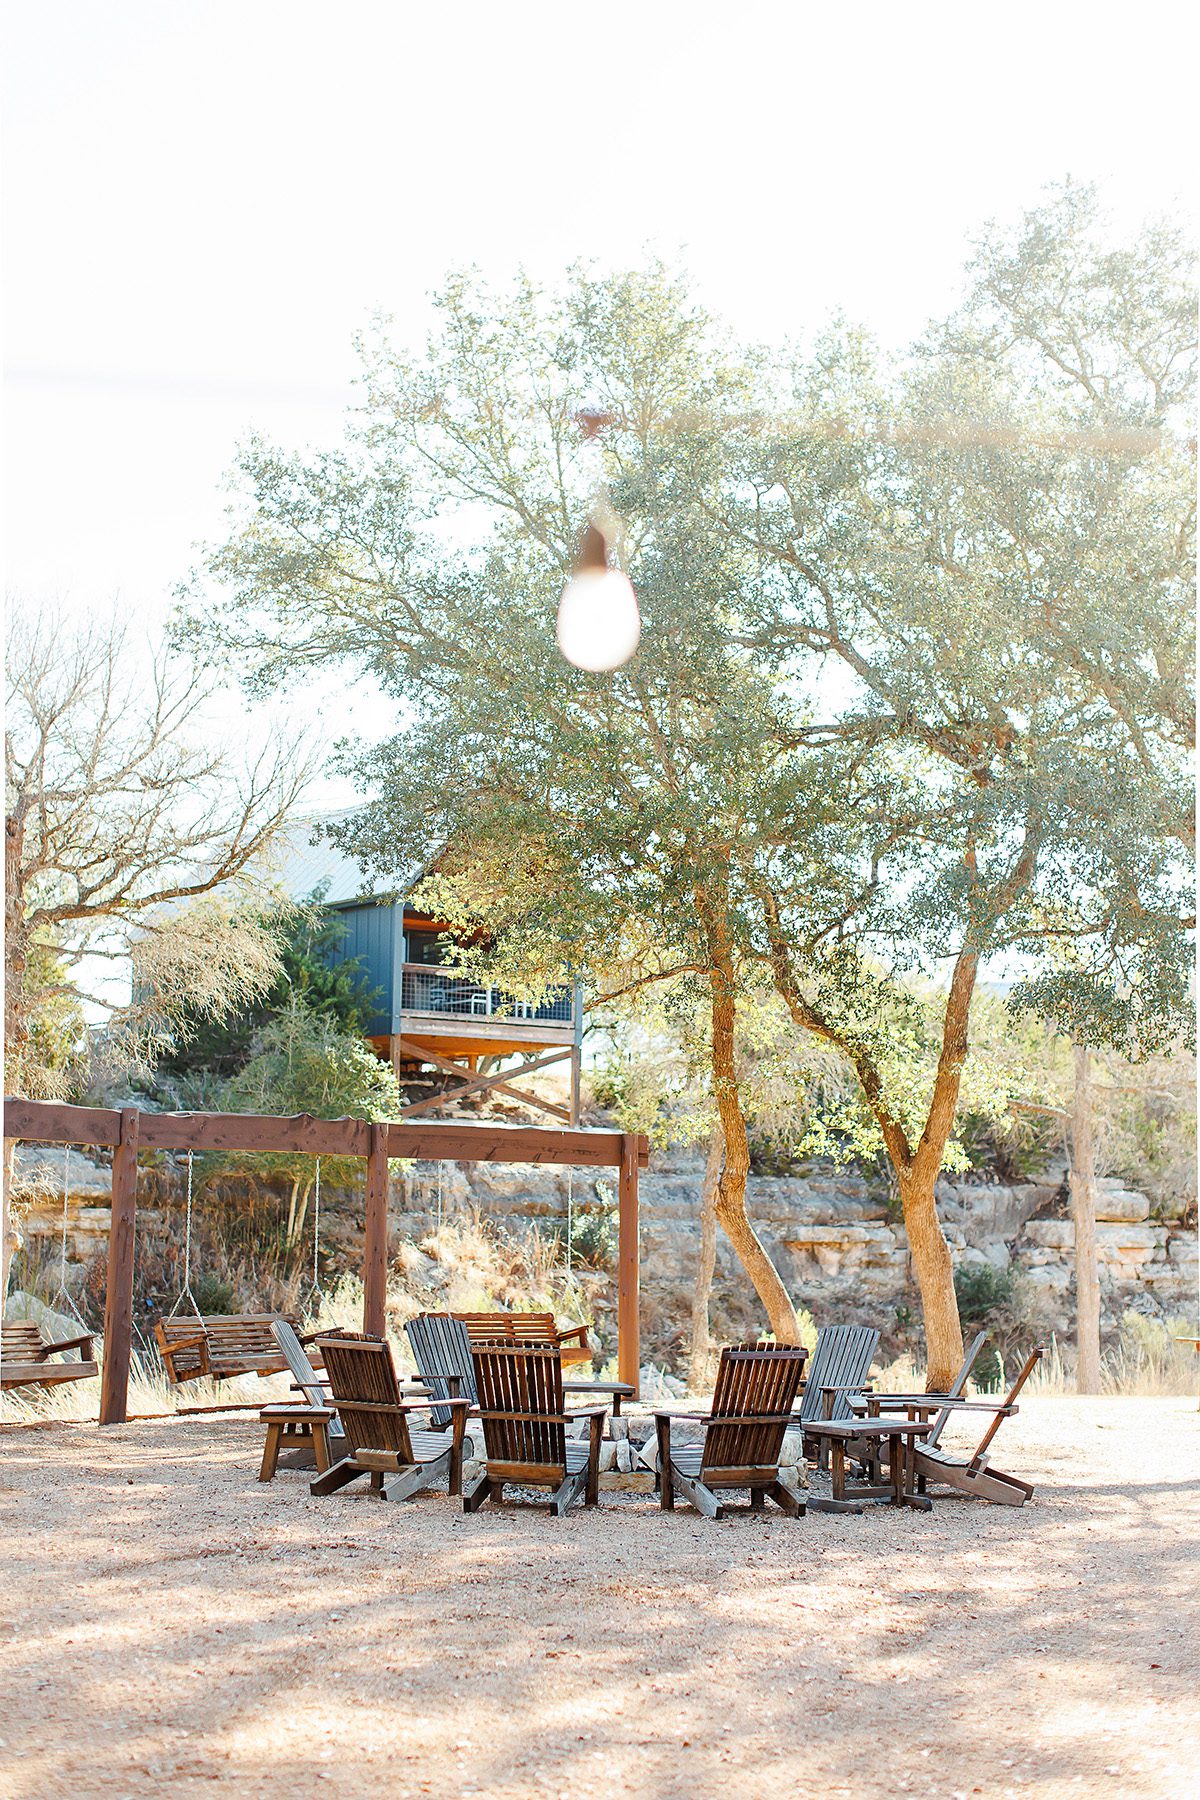 Wanderin Star Farms common area fire pit Dripping Springs, Texas